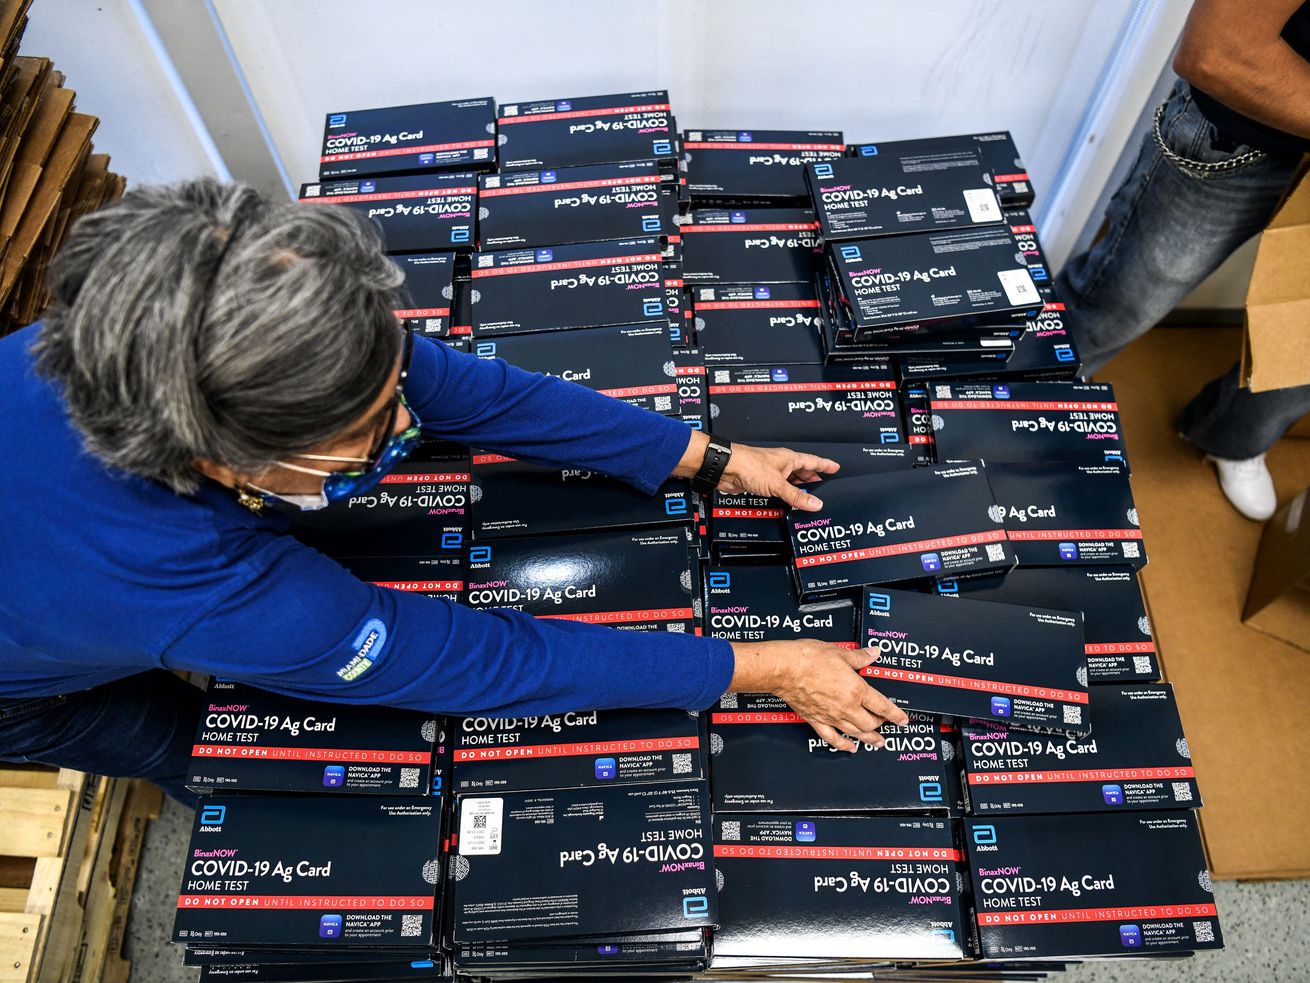 A person reaching across a large number of boxes of Covid-19 tests.